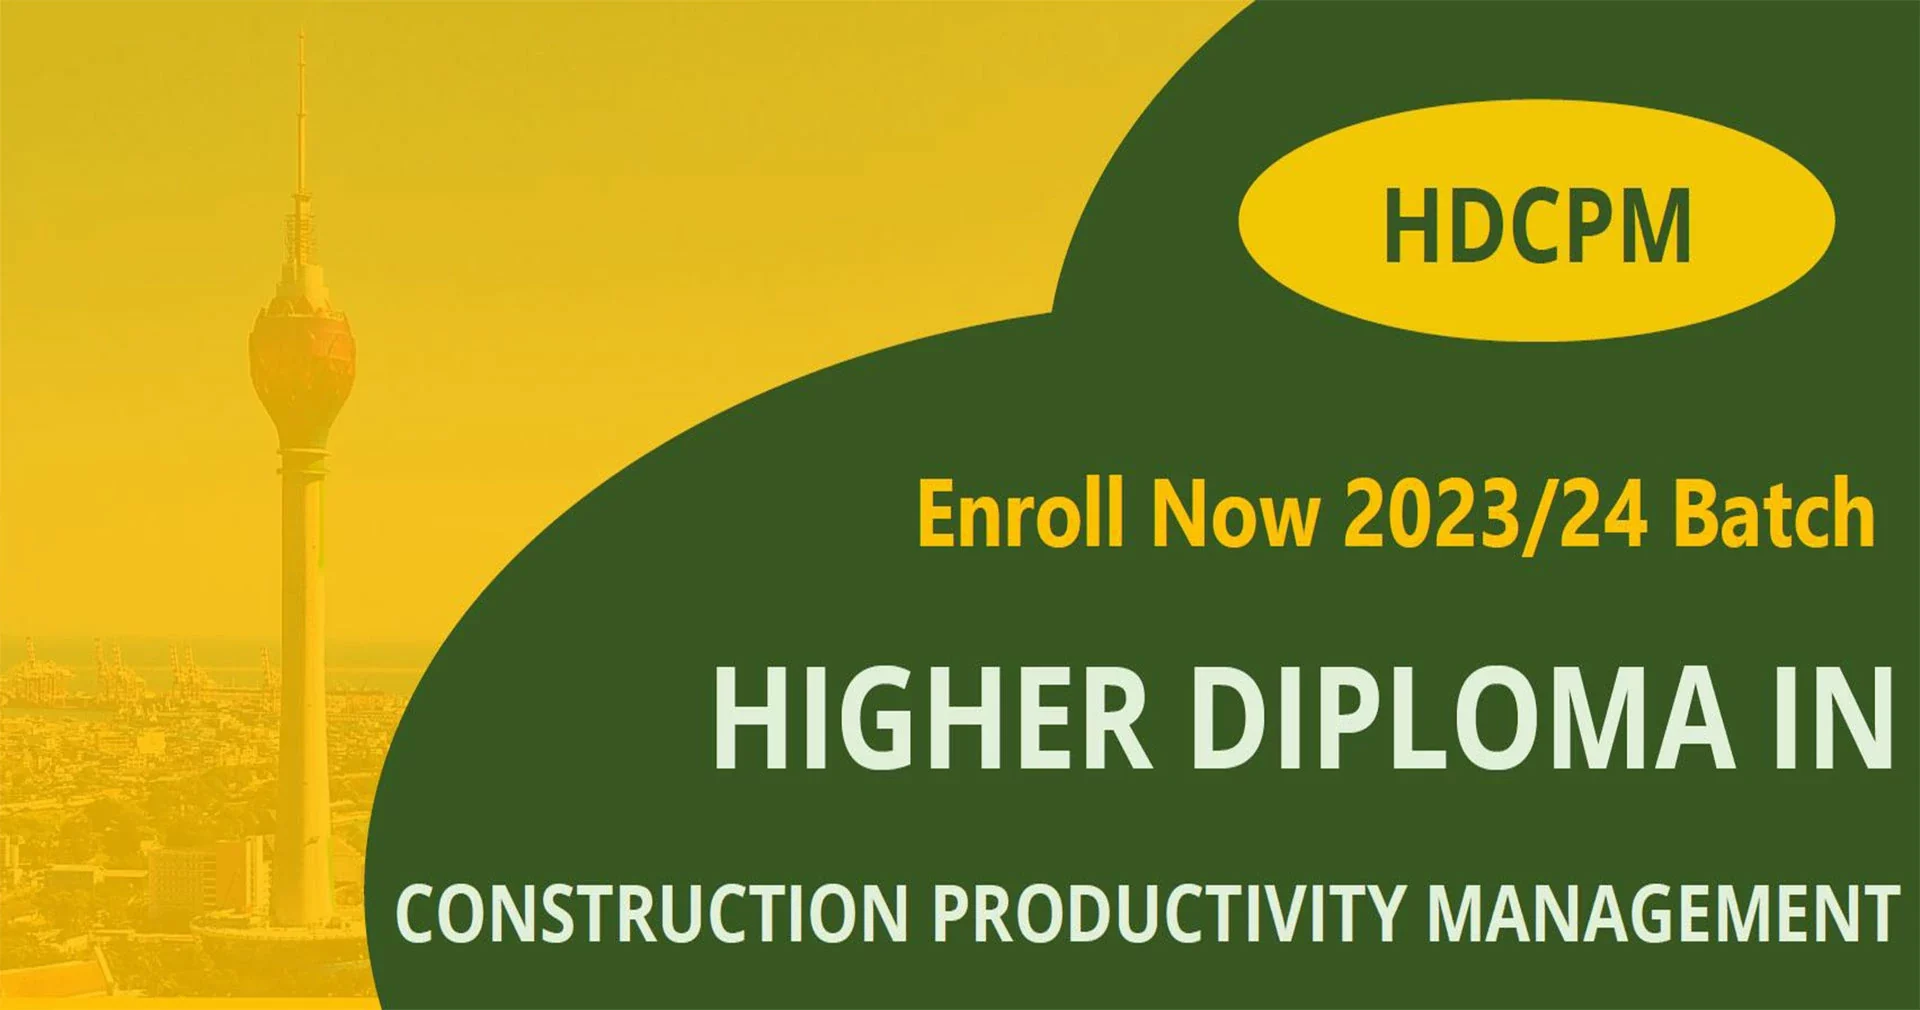 Calling Applications For Higher Diploma In Construction Productivity Management